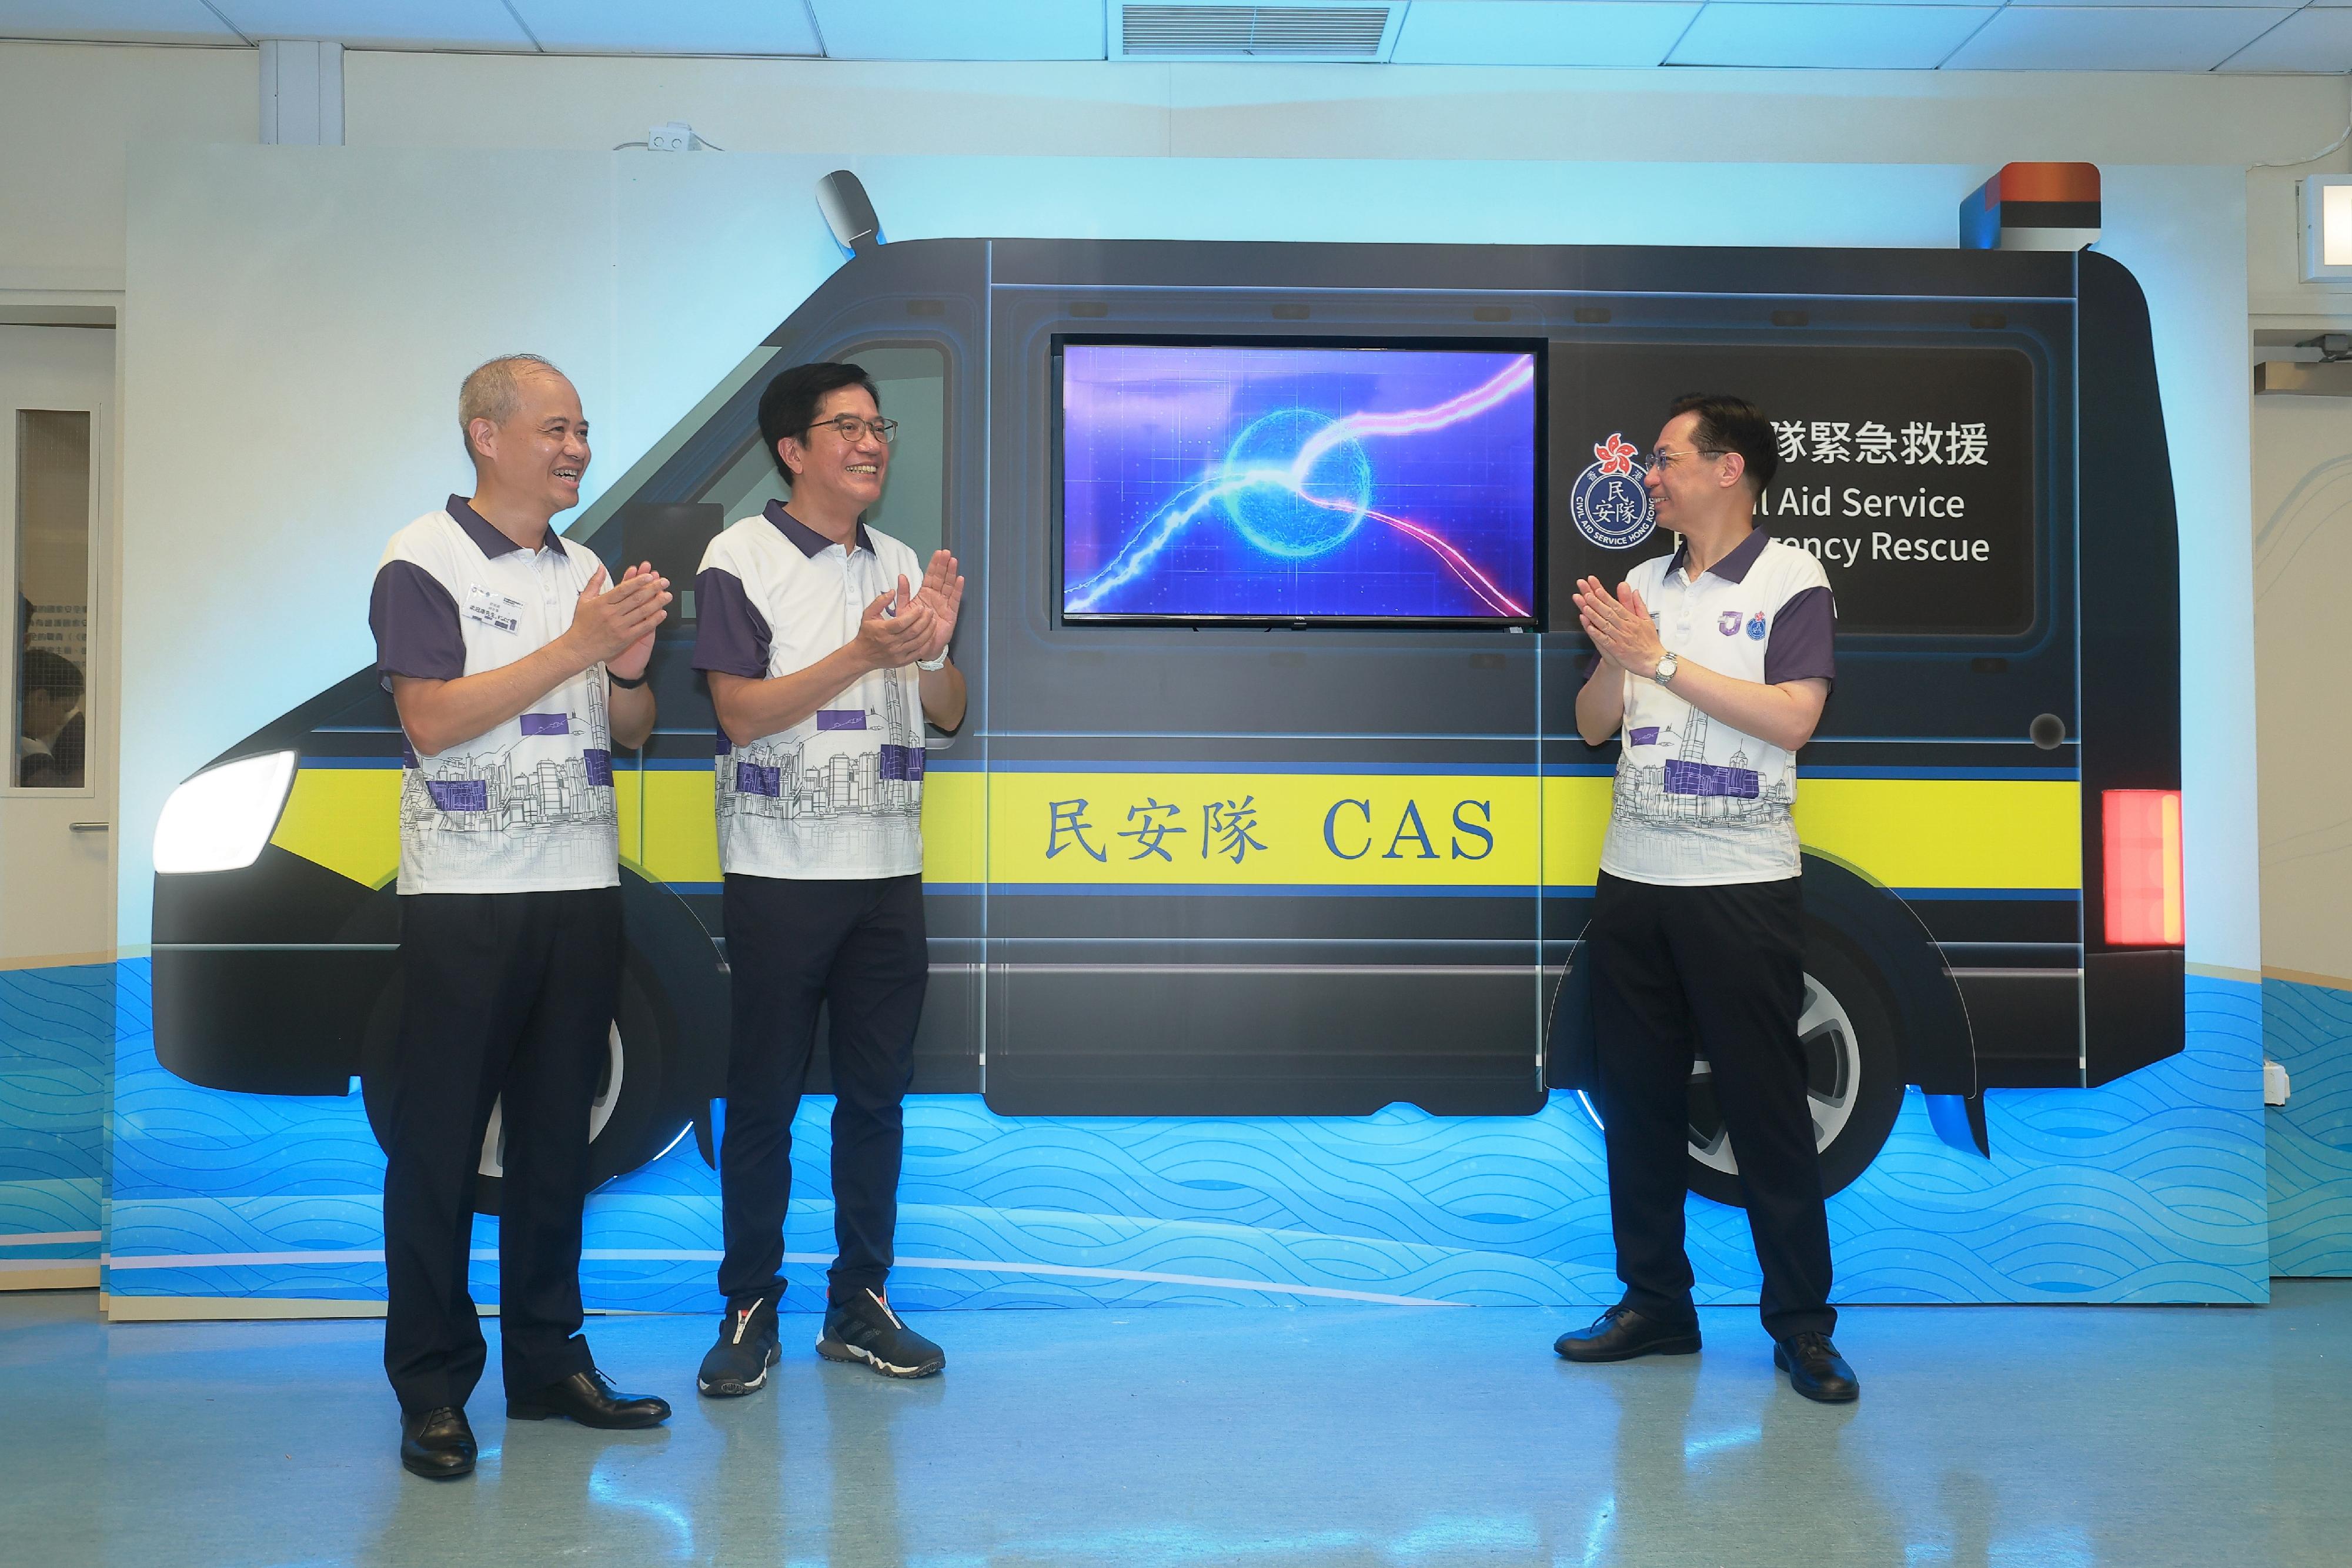 The Civil Aid Service (CAS) held an open day at its headquarters today (April 14) to promote the National Security Education Day. Photo shows the Deputy Financial Secretary, Mr Michael Wong (centre), officiating the opening ceremony of the CAS’s National Security Education Exhibition Centre.